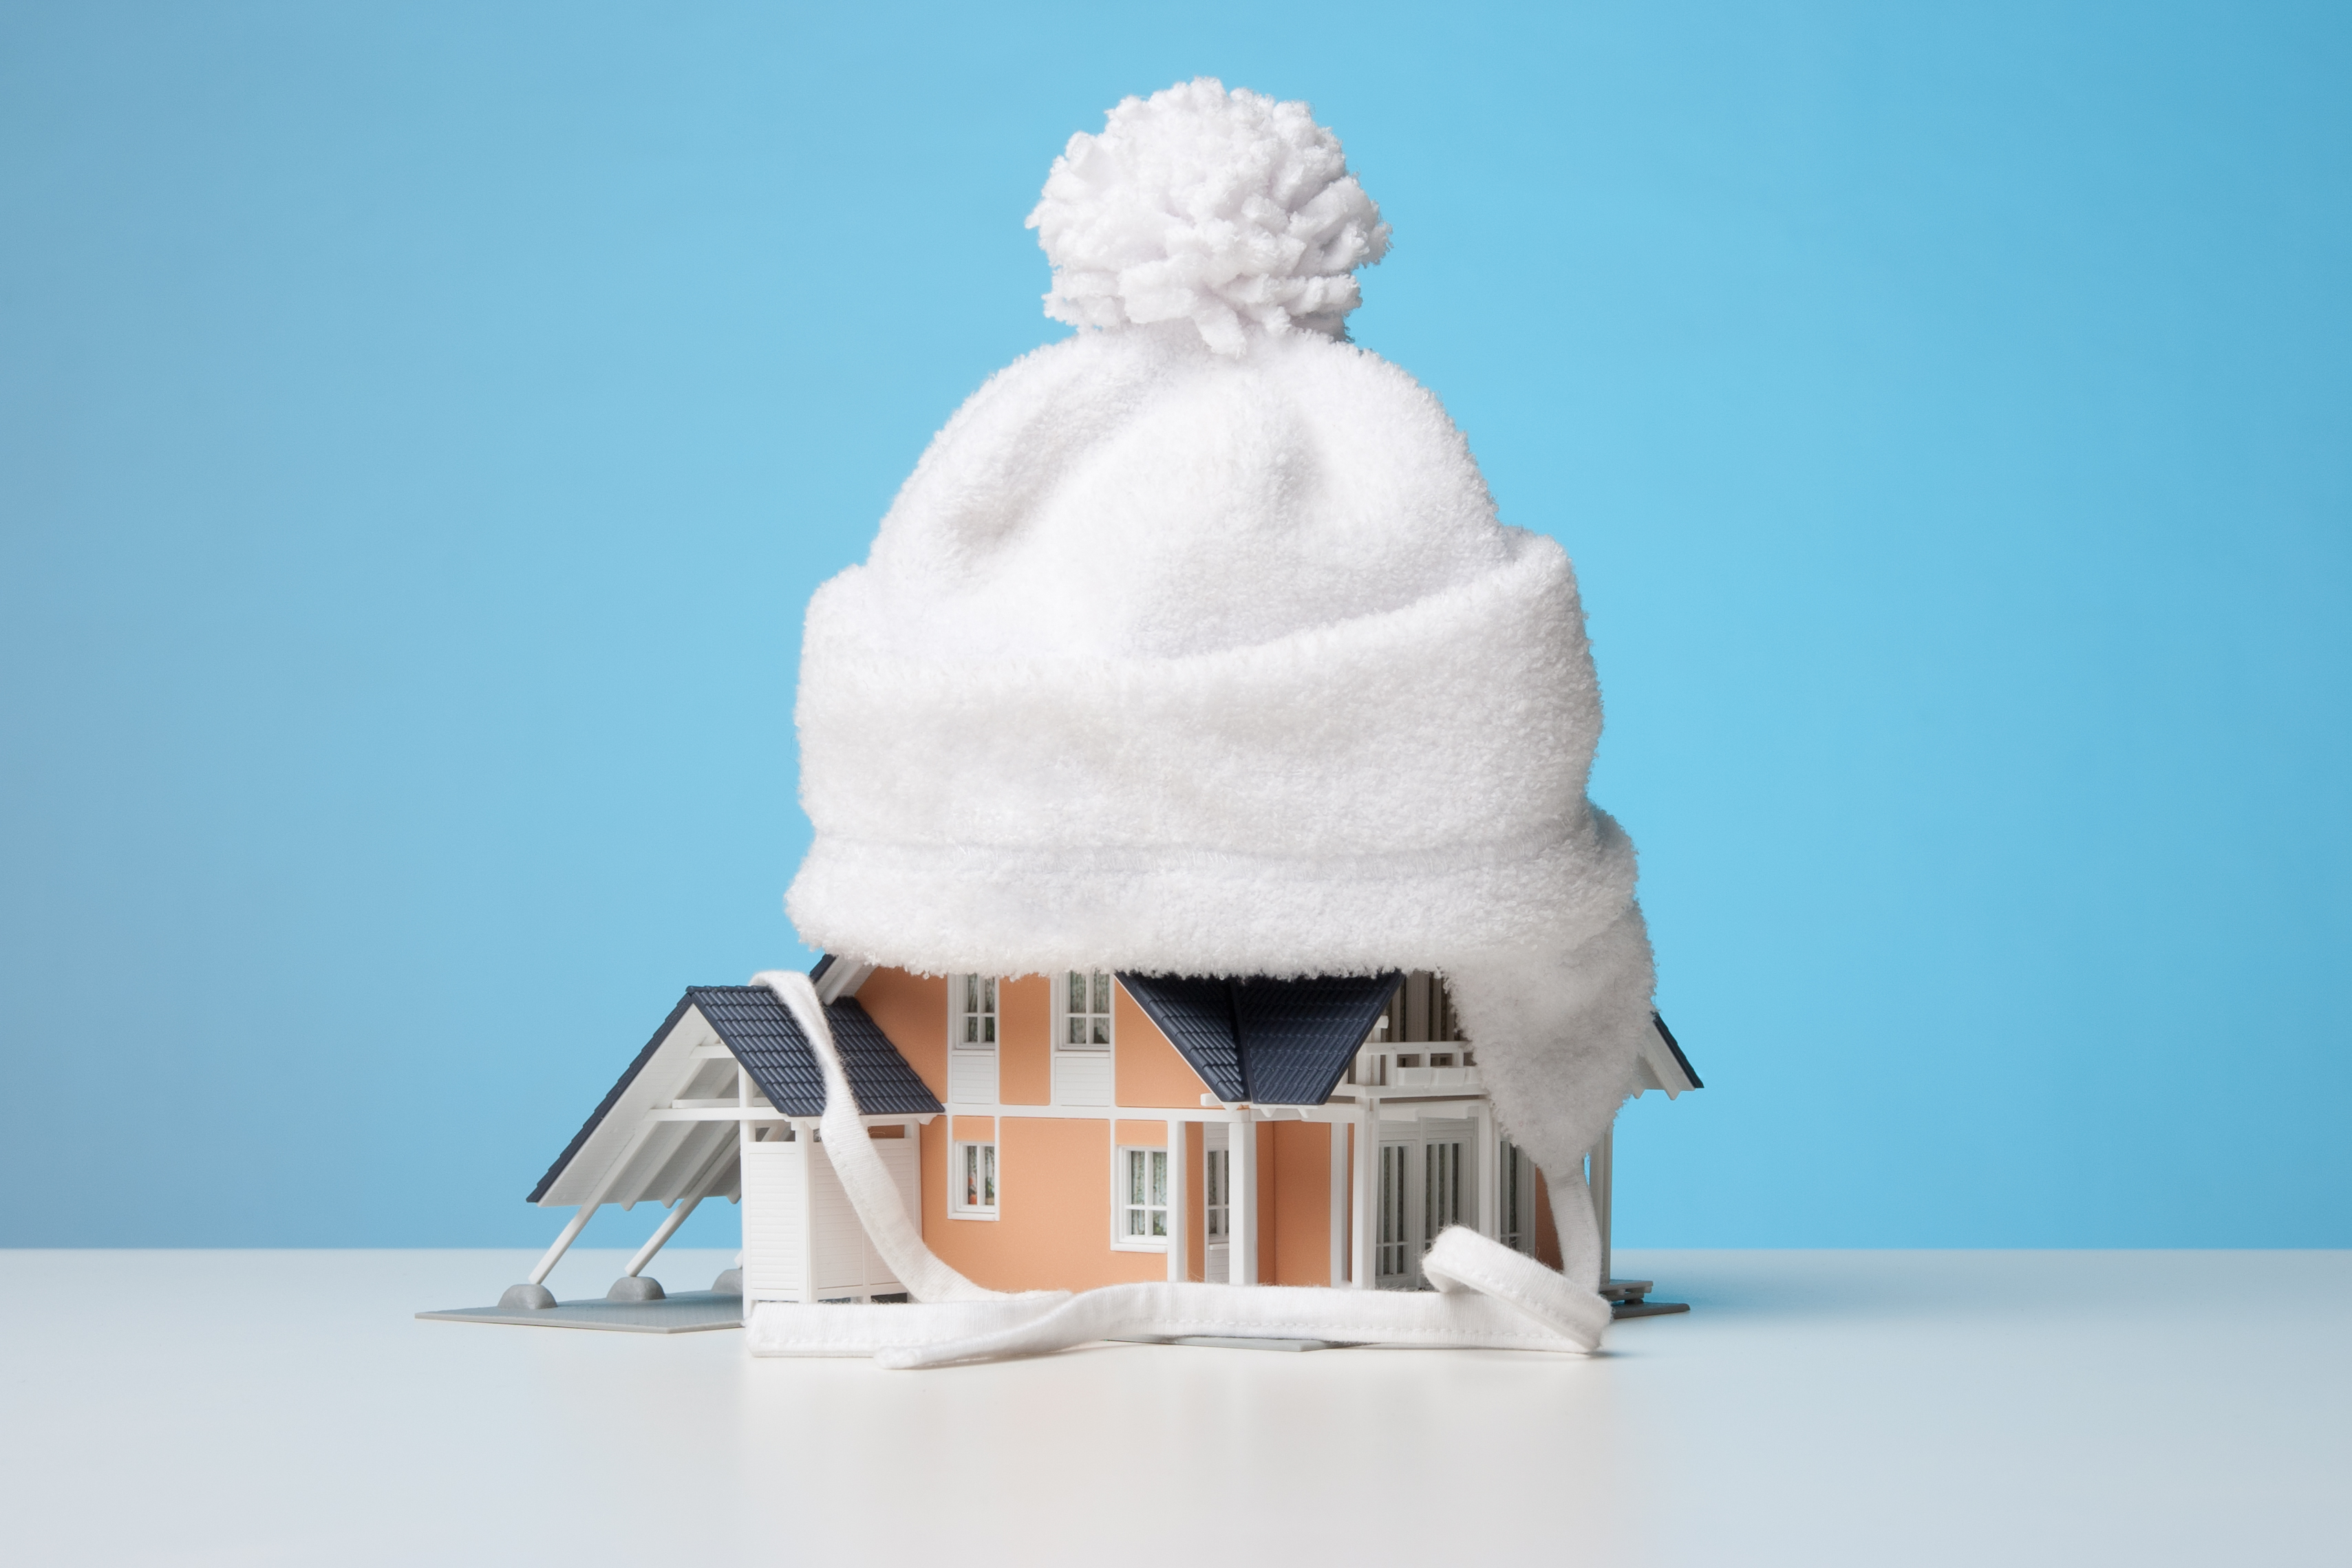  Keep your family cozy and save money! We provide professional attic insulation solutions to clients.